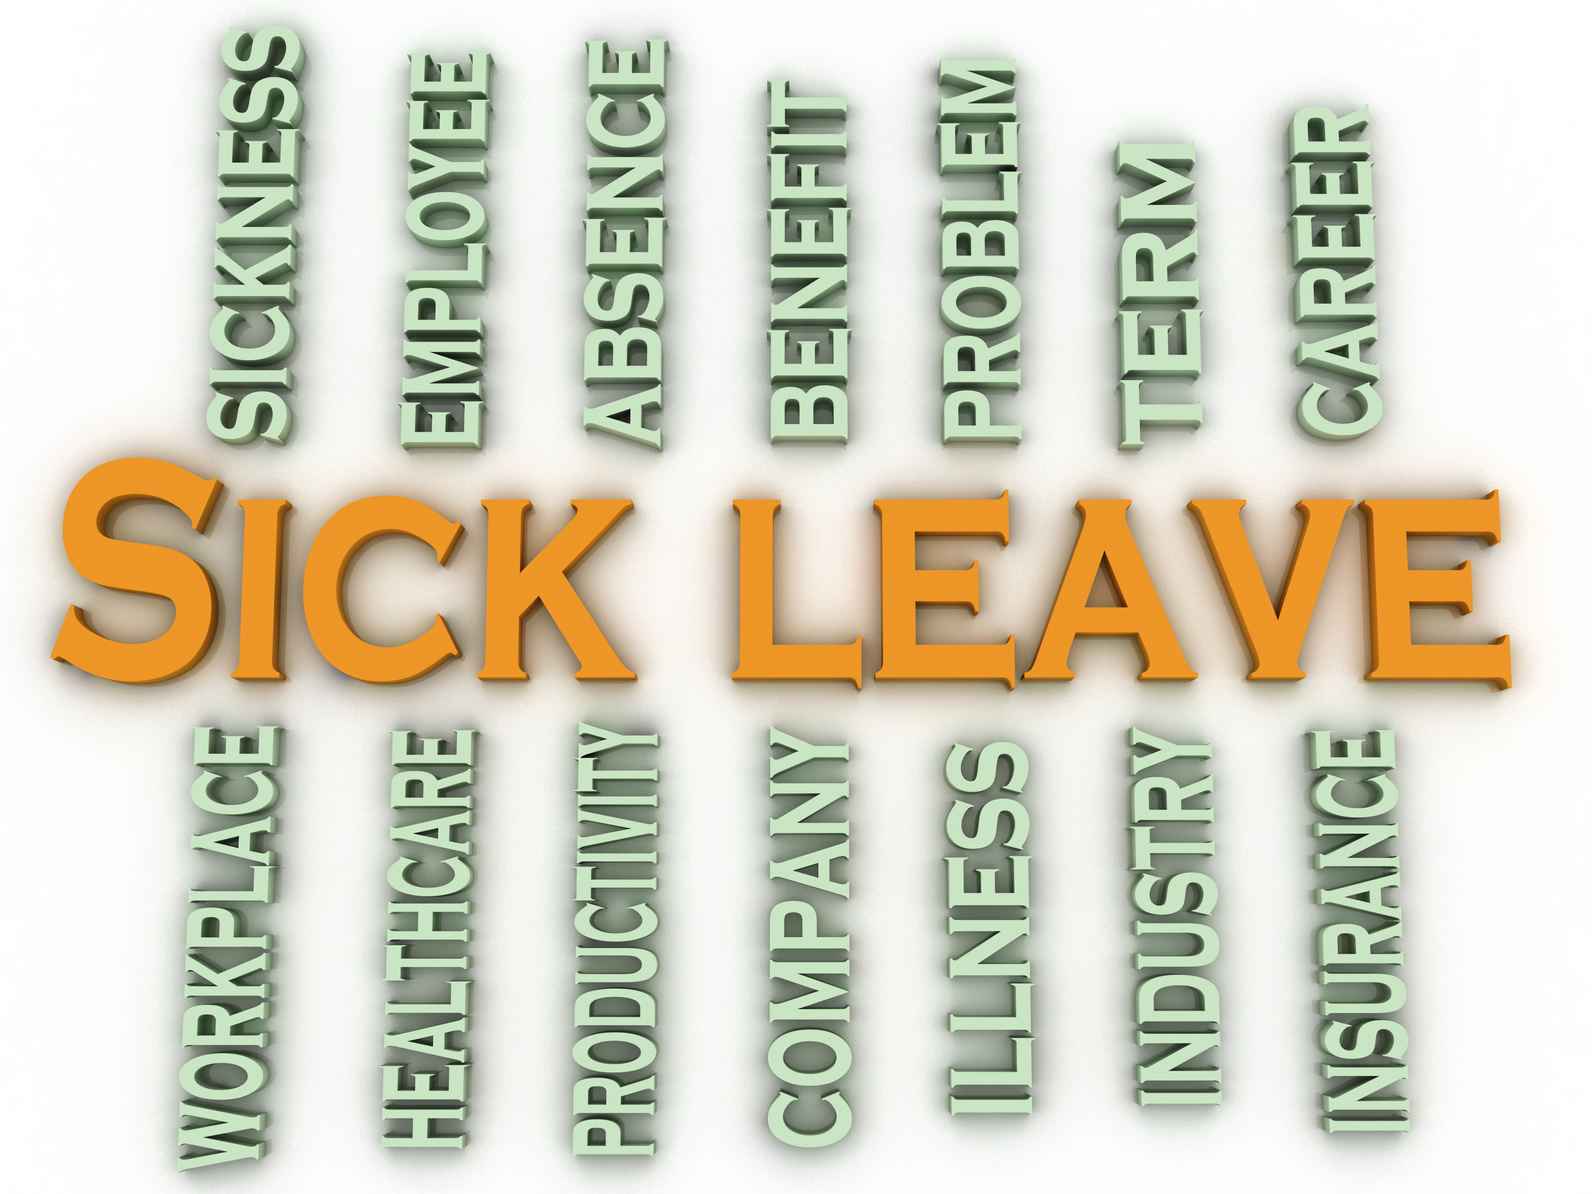 How to Write an Application to Principal for Sick Leave